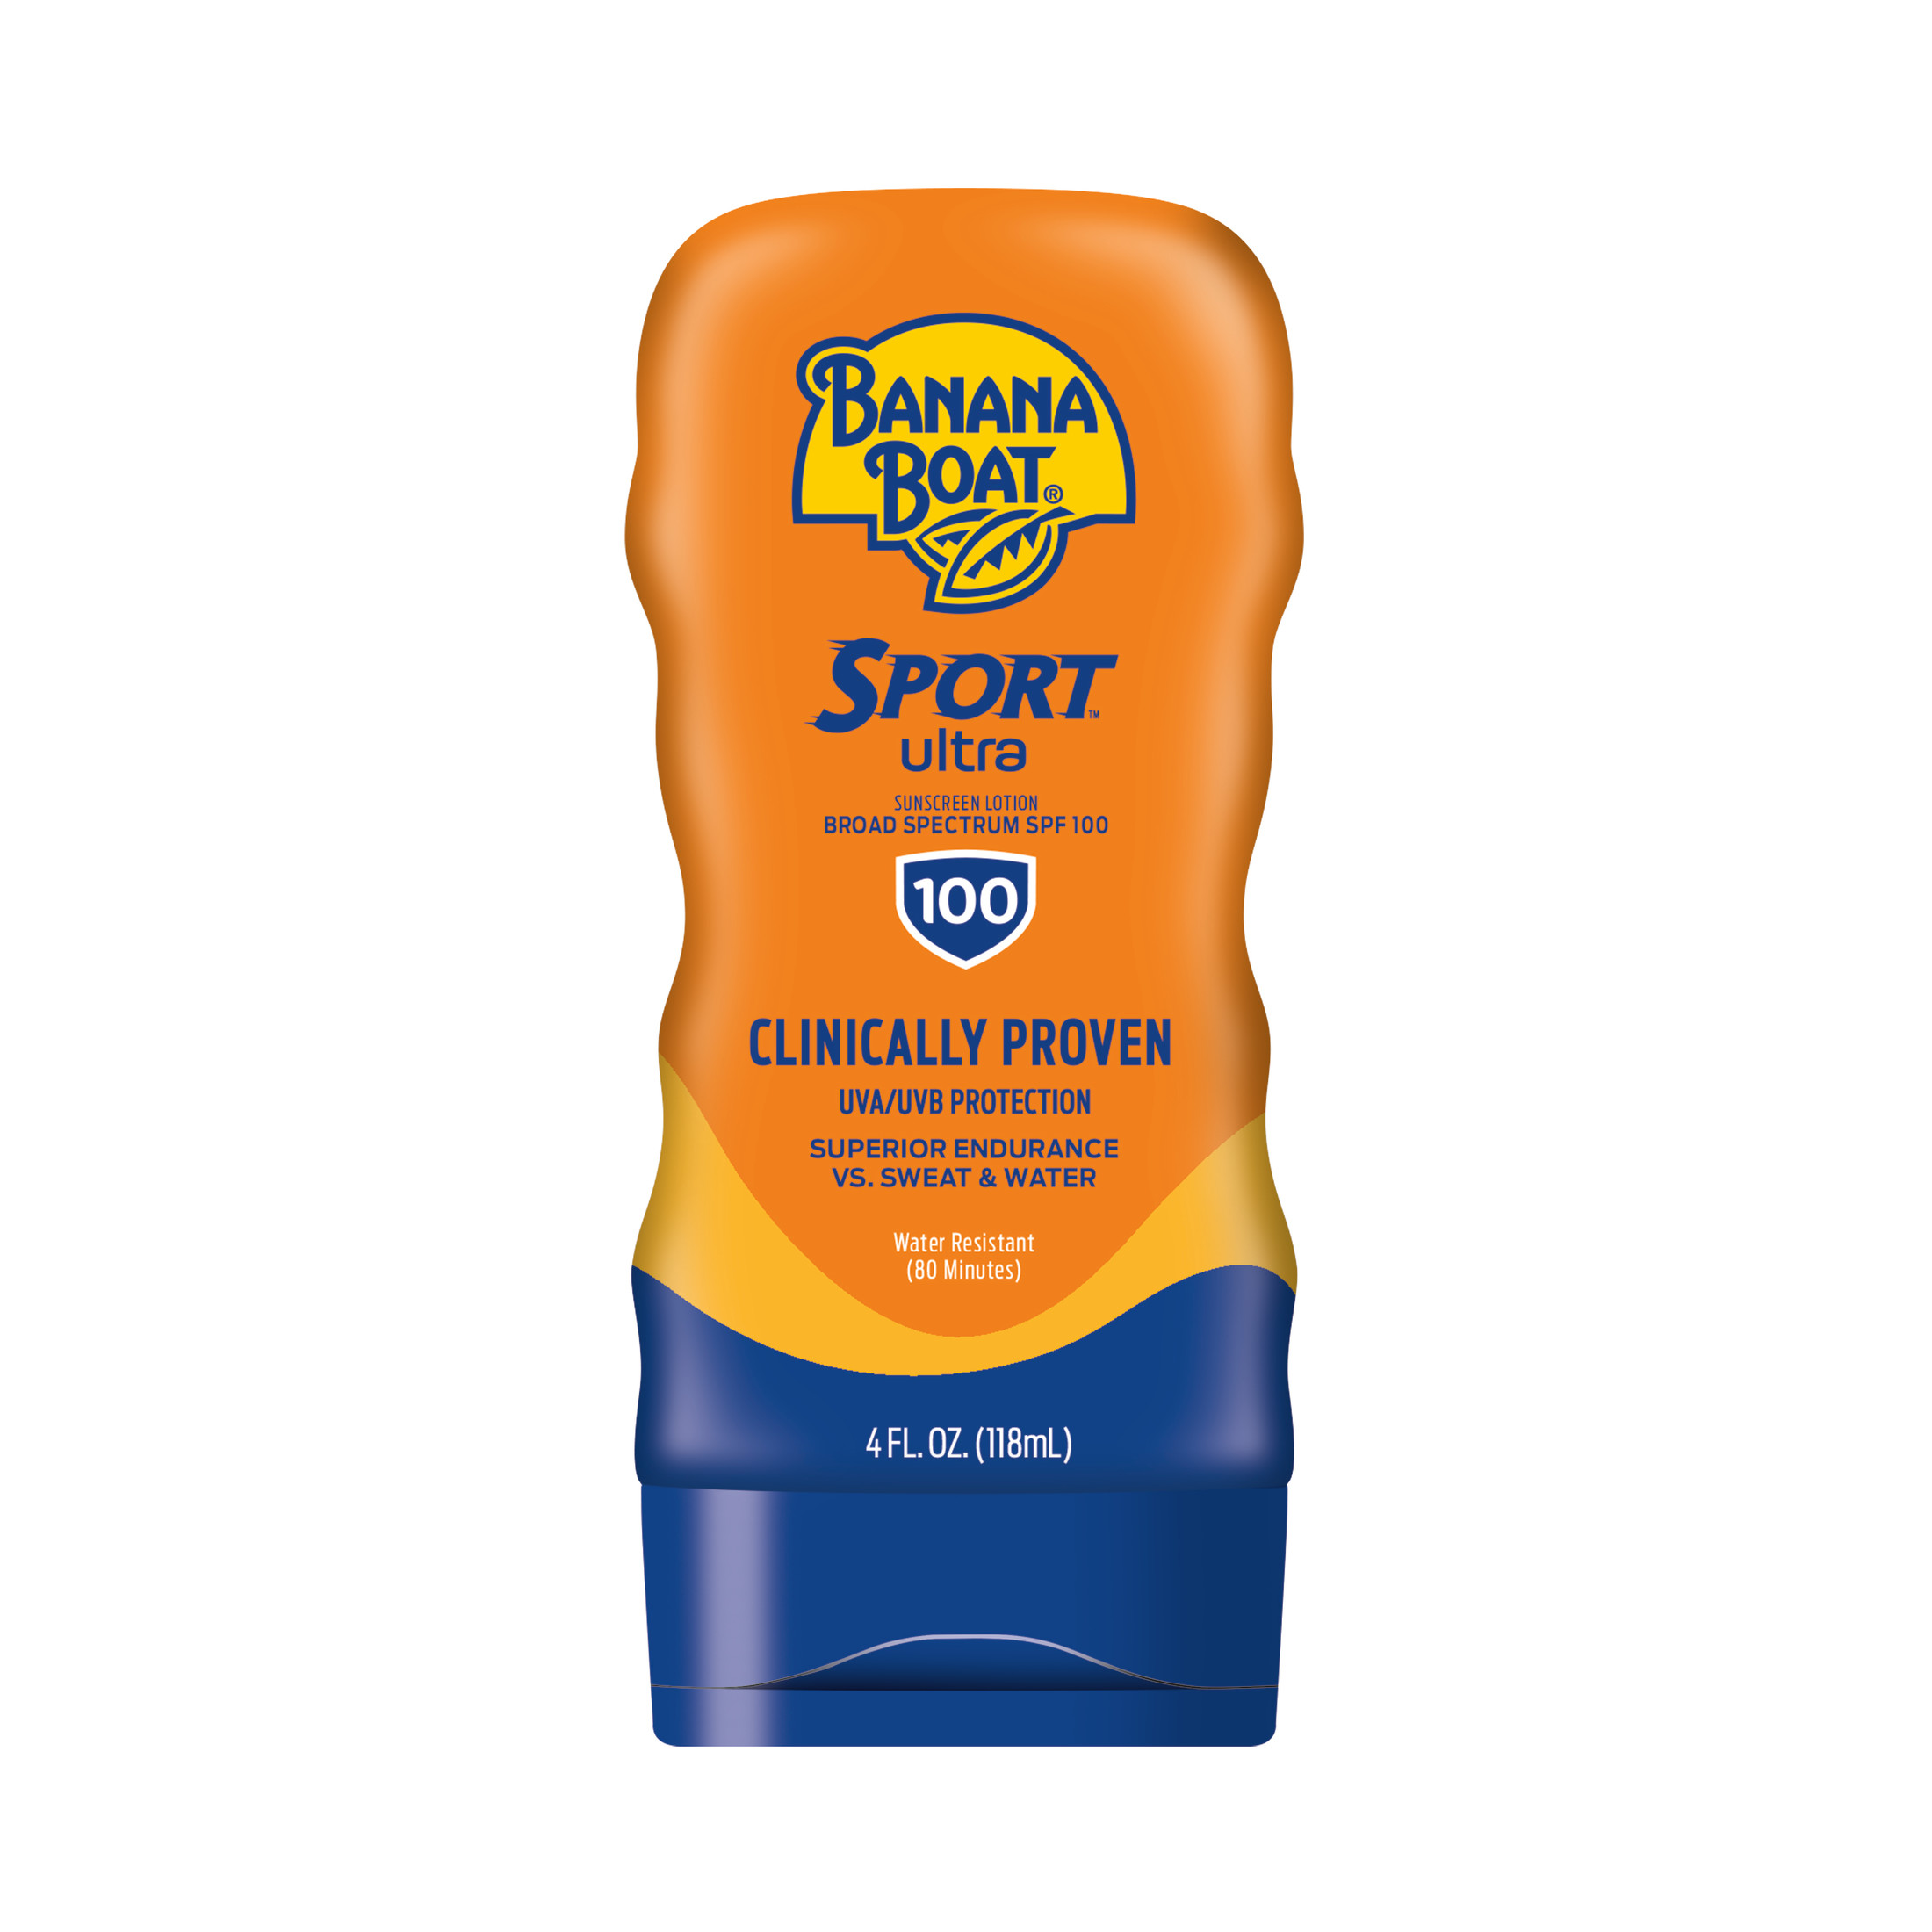 Banana Boat Sport Ultra 100 SPF Sunscreen Lotion, 4oz, Water Resistant (80 Minutes) Adult Sun Block - image 1 of 9